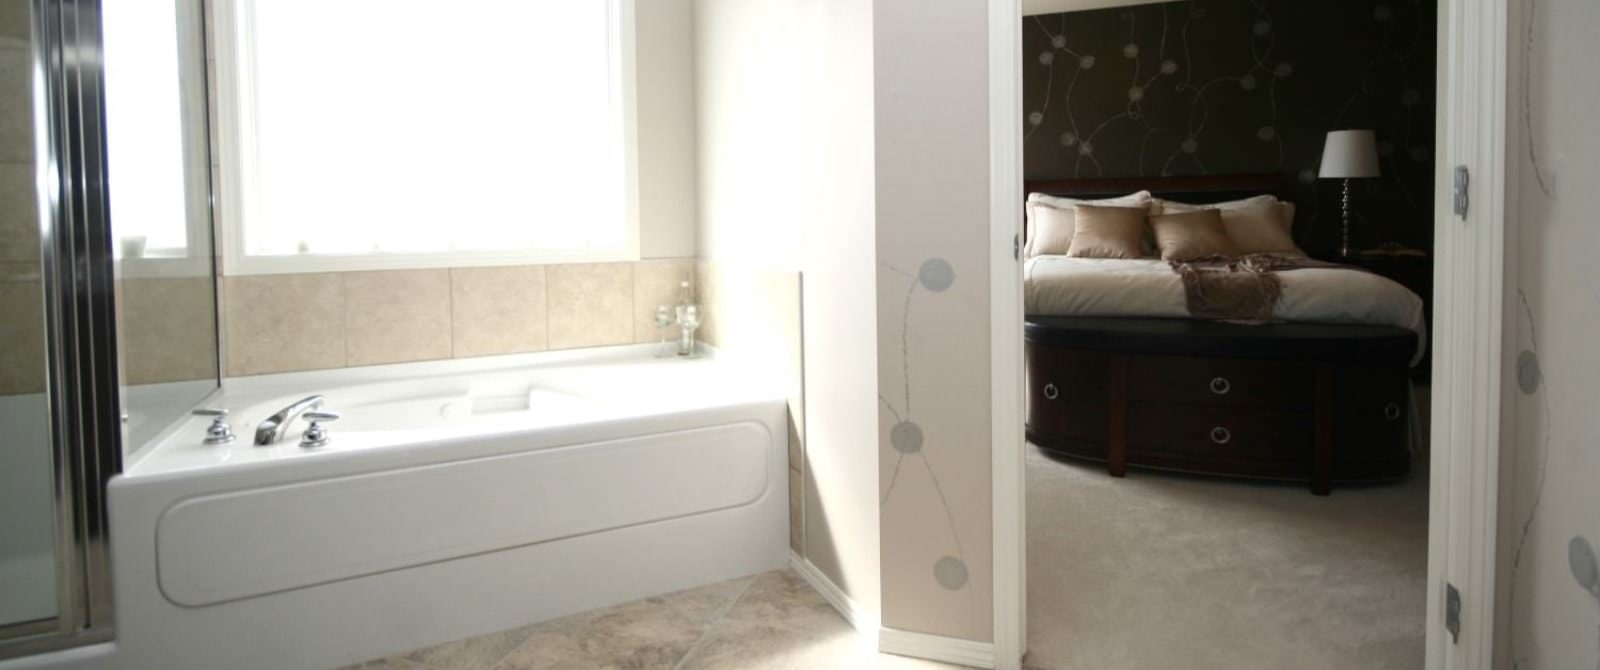 Bathroom with large white tub and separate stand up shower with tiled floor